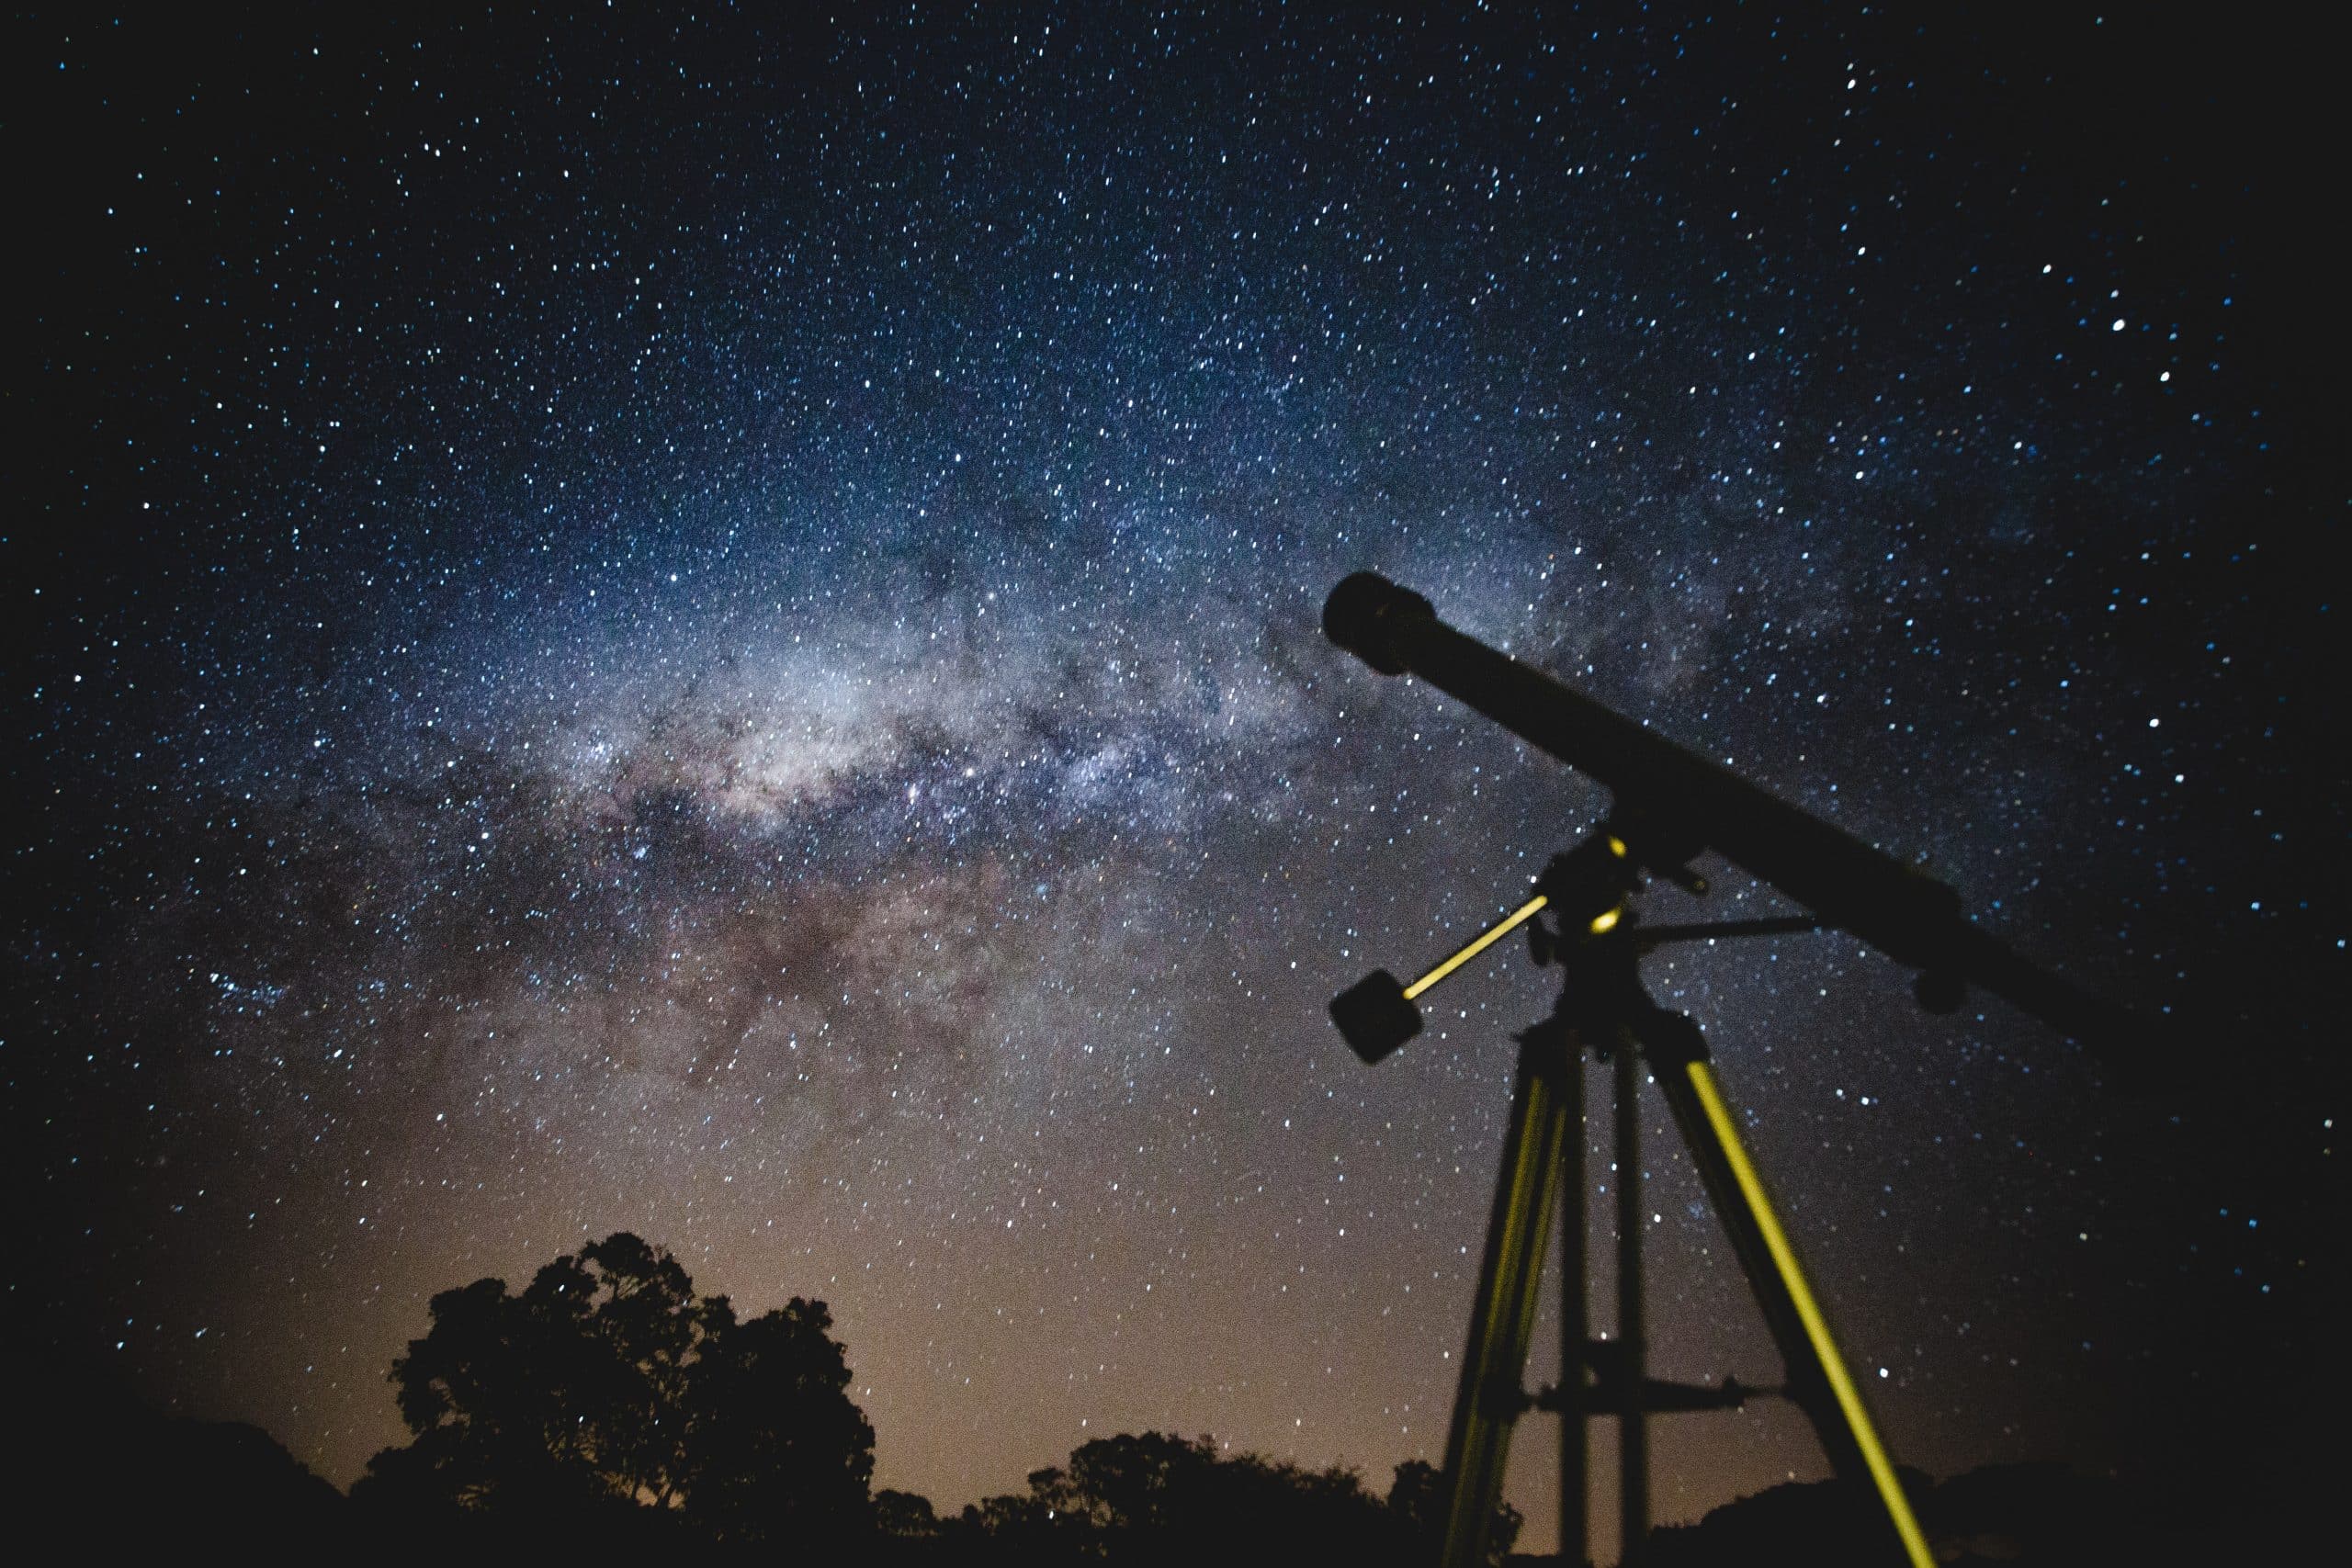 A night sky filled with stars. A telescope is set up underneath